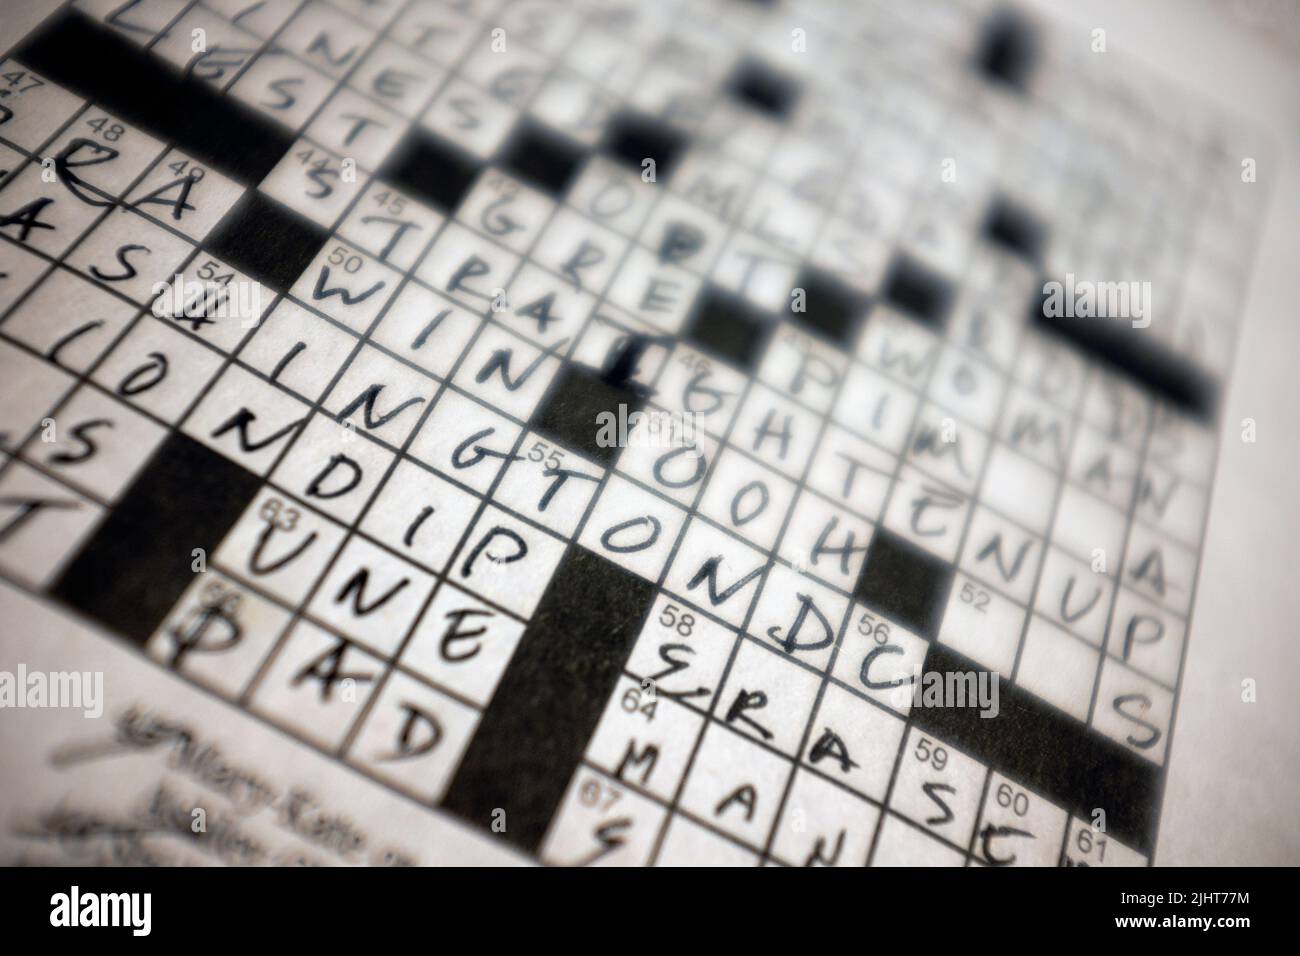 Almost Completed Newspaper Crossword Puzzle Stock Photo